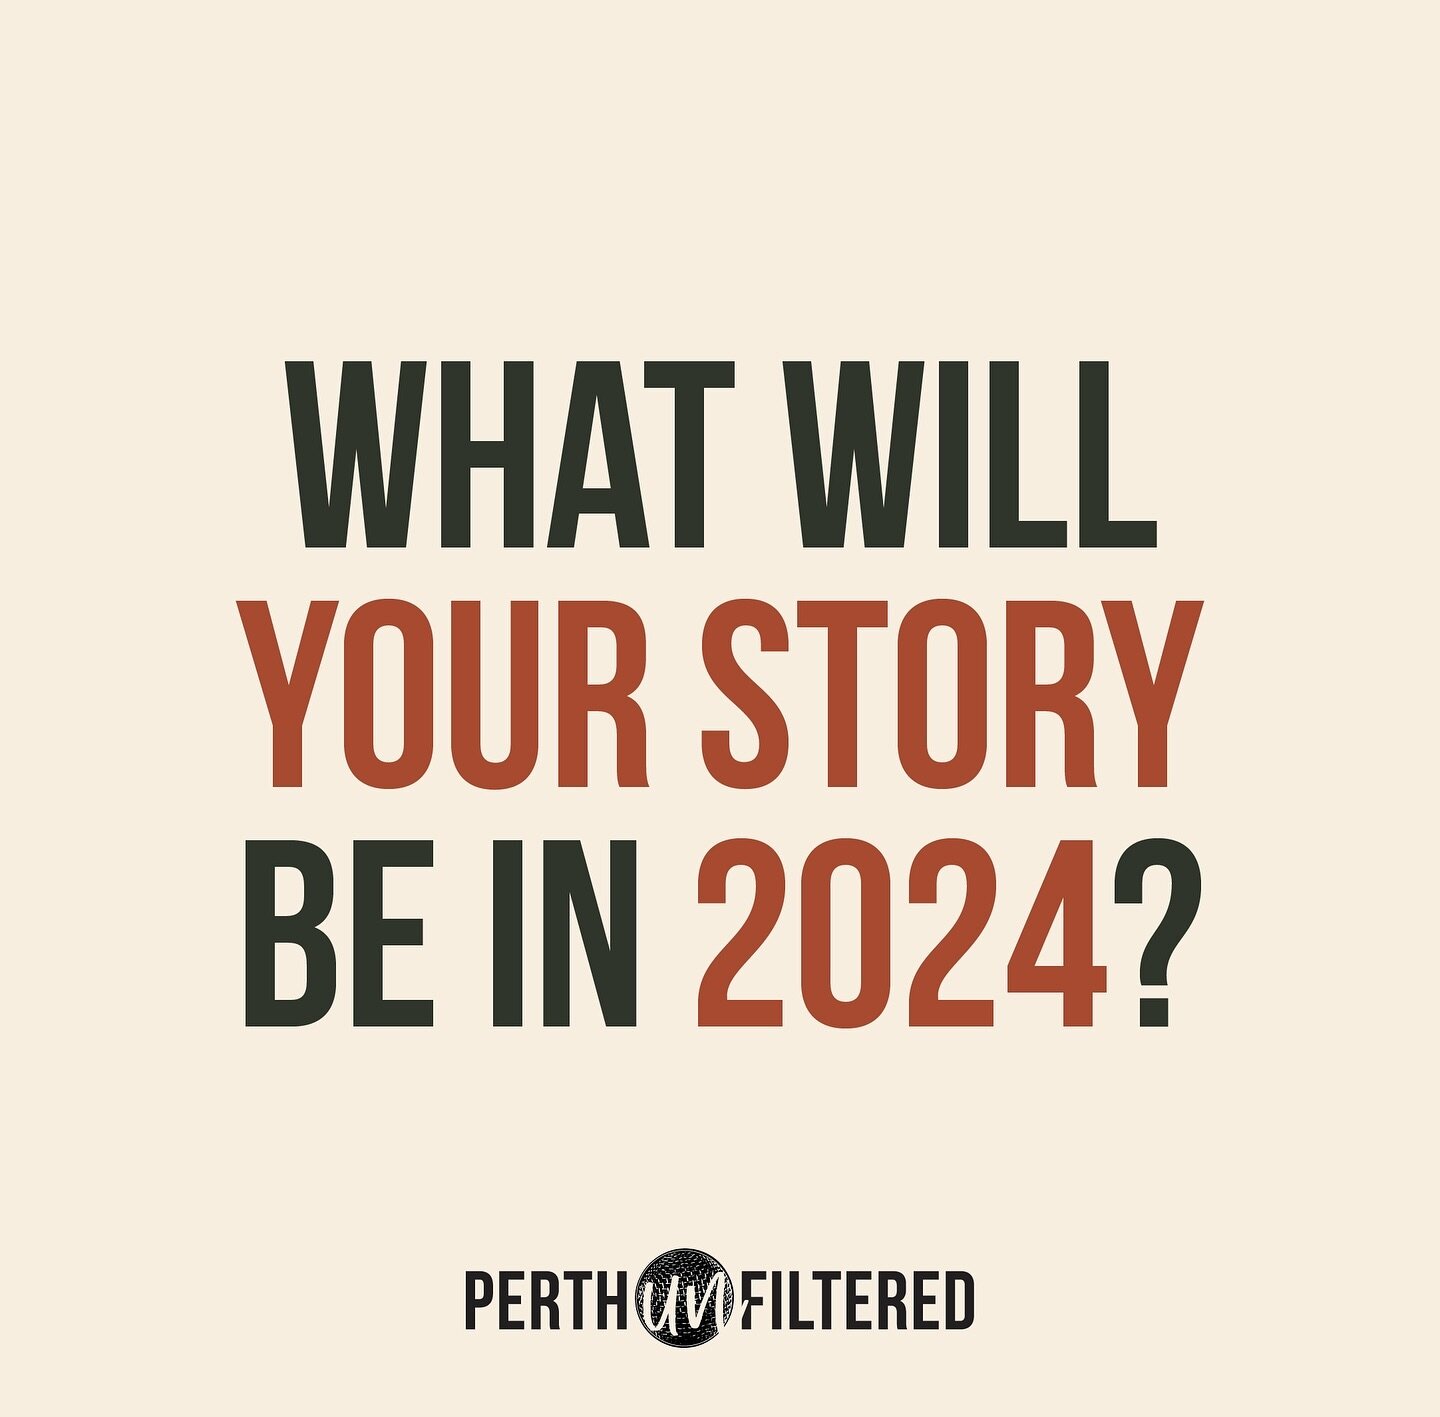 Are you ready to tell your story in 2024?

Applications are now open for our Feb, March and April events - reach out and let us know if you want to be part of the lineup.

A reminder - we provide a safe, engaged and casual space for you to share a st